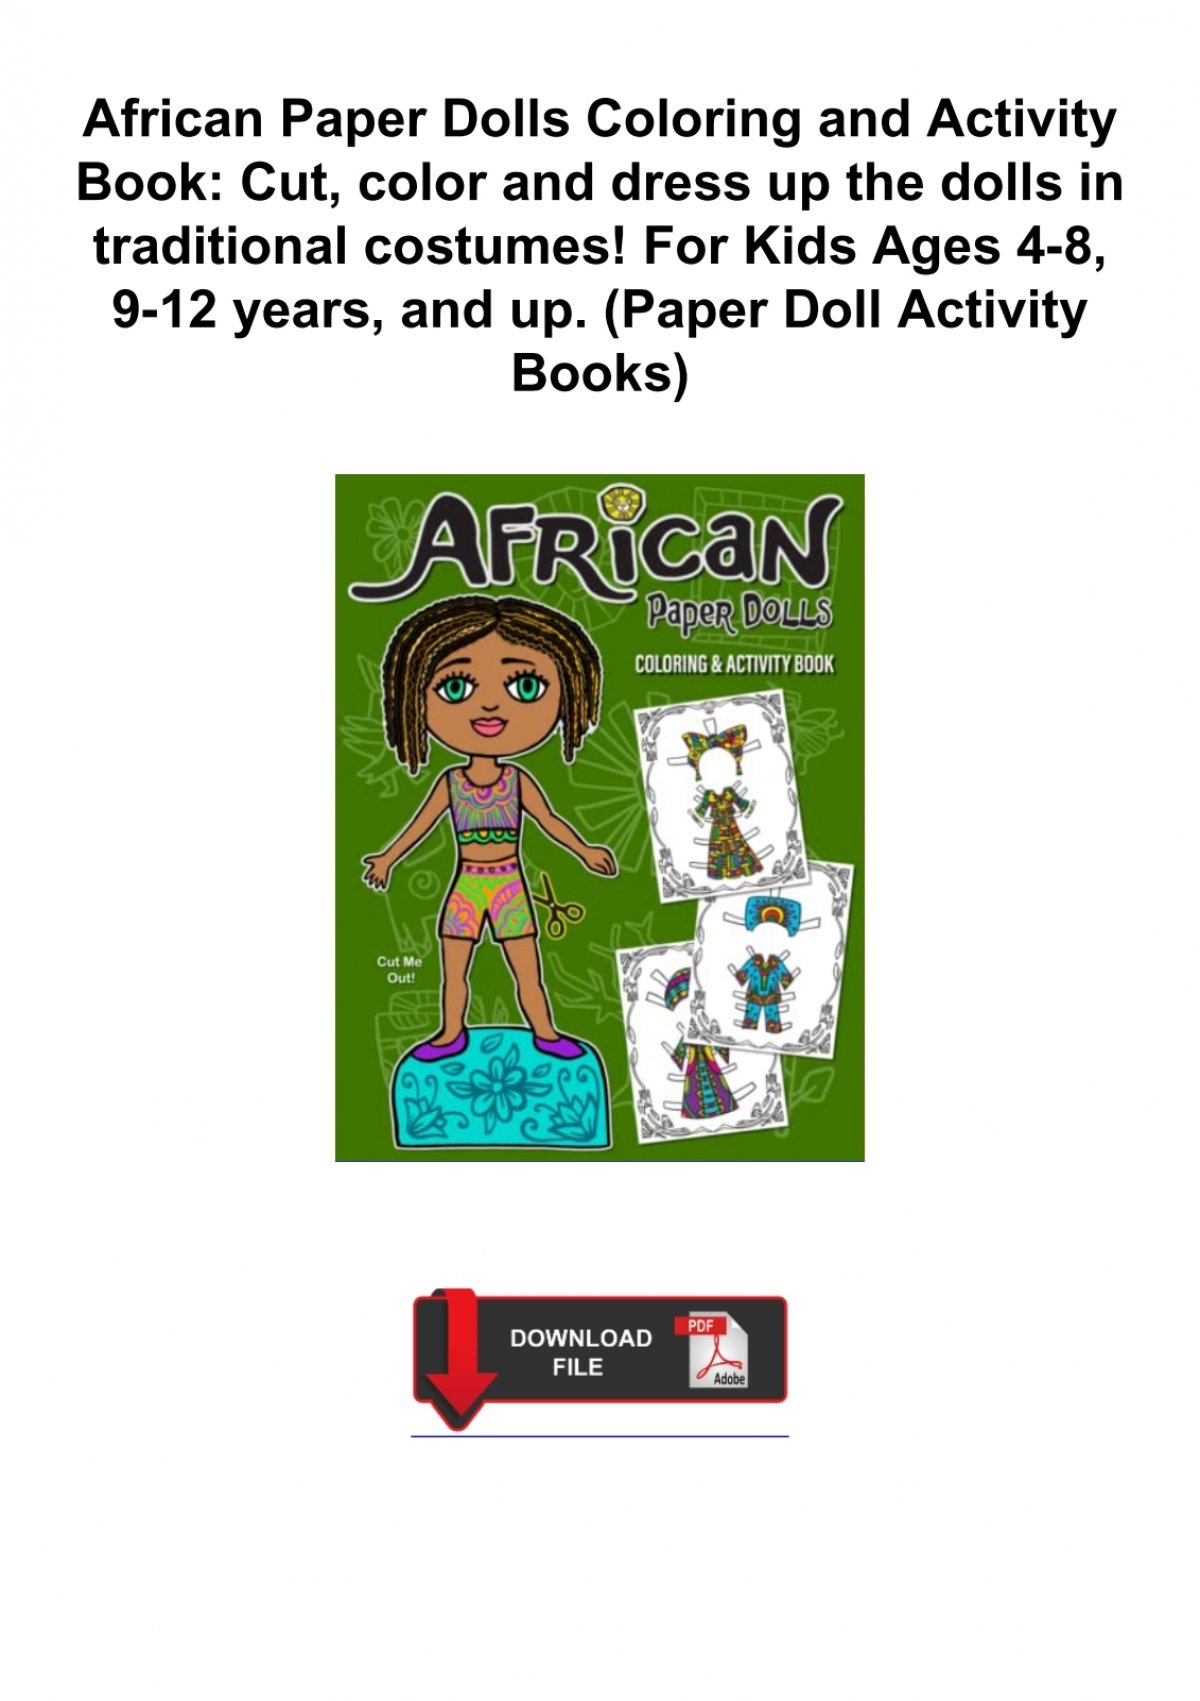 African Paper Dolls Coloring and Activity Book: Cut, color and dress up the  dolls in traditional costumes! For Kids Ages 4-8, 9-12 years, and up.